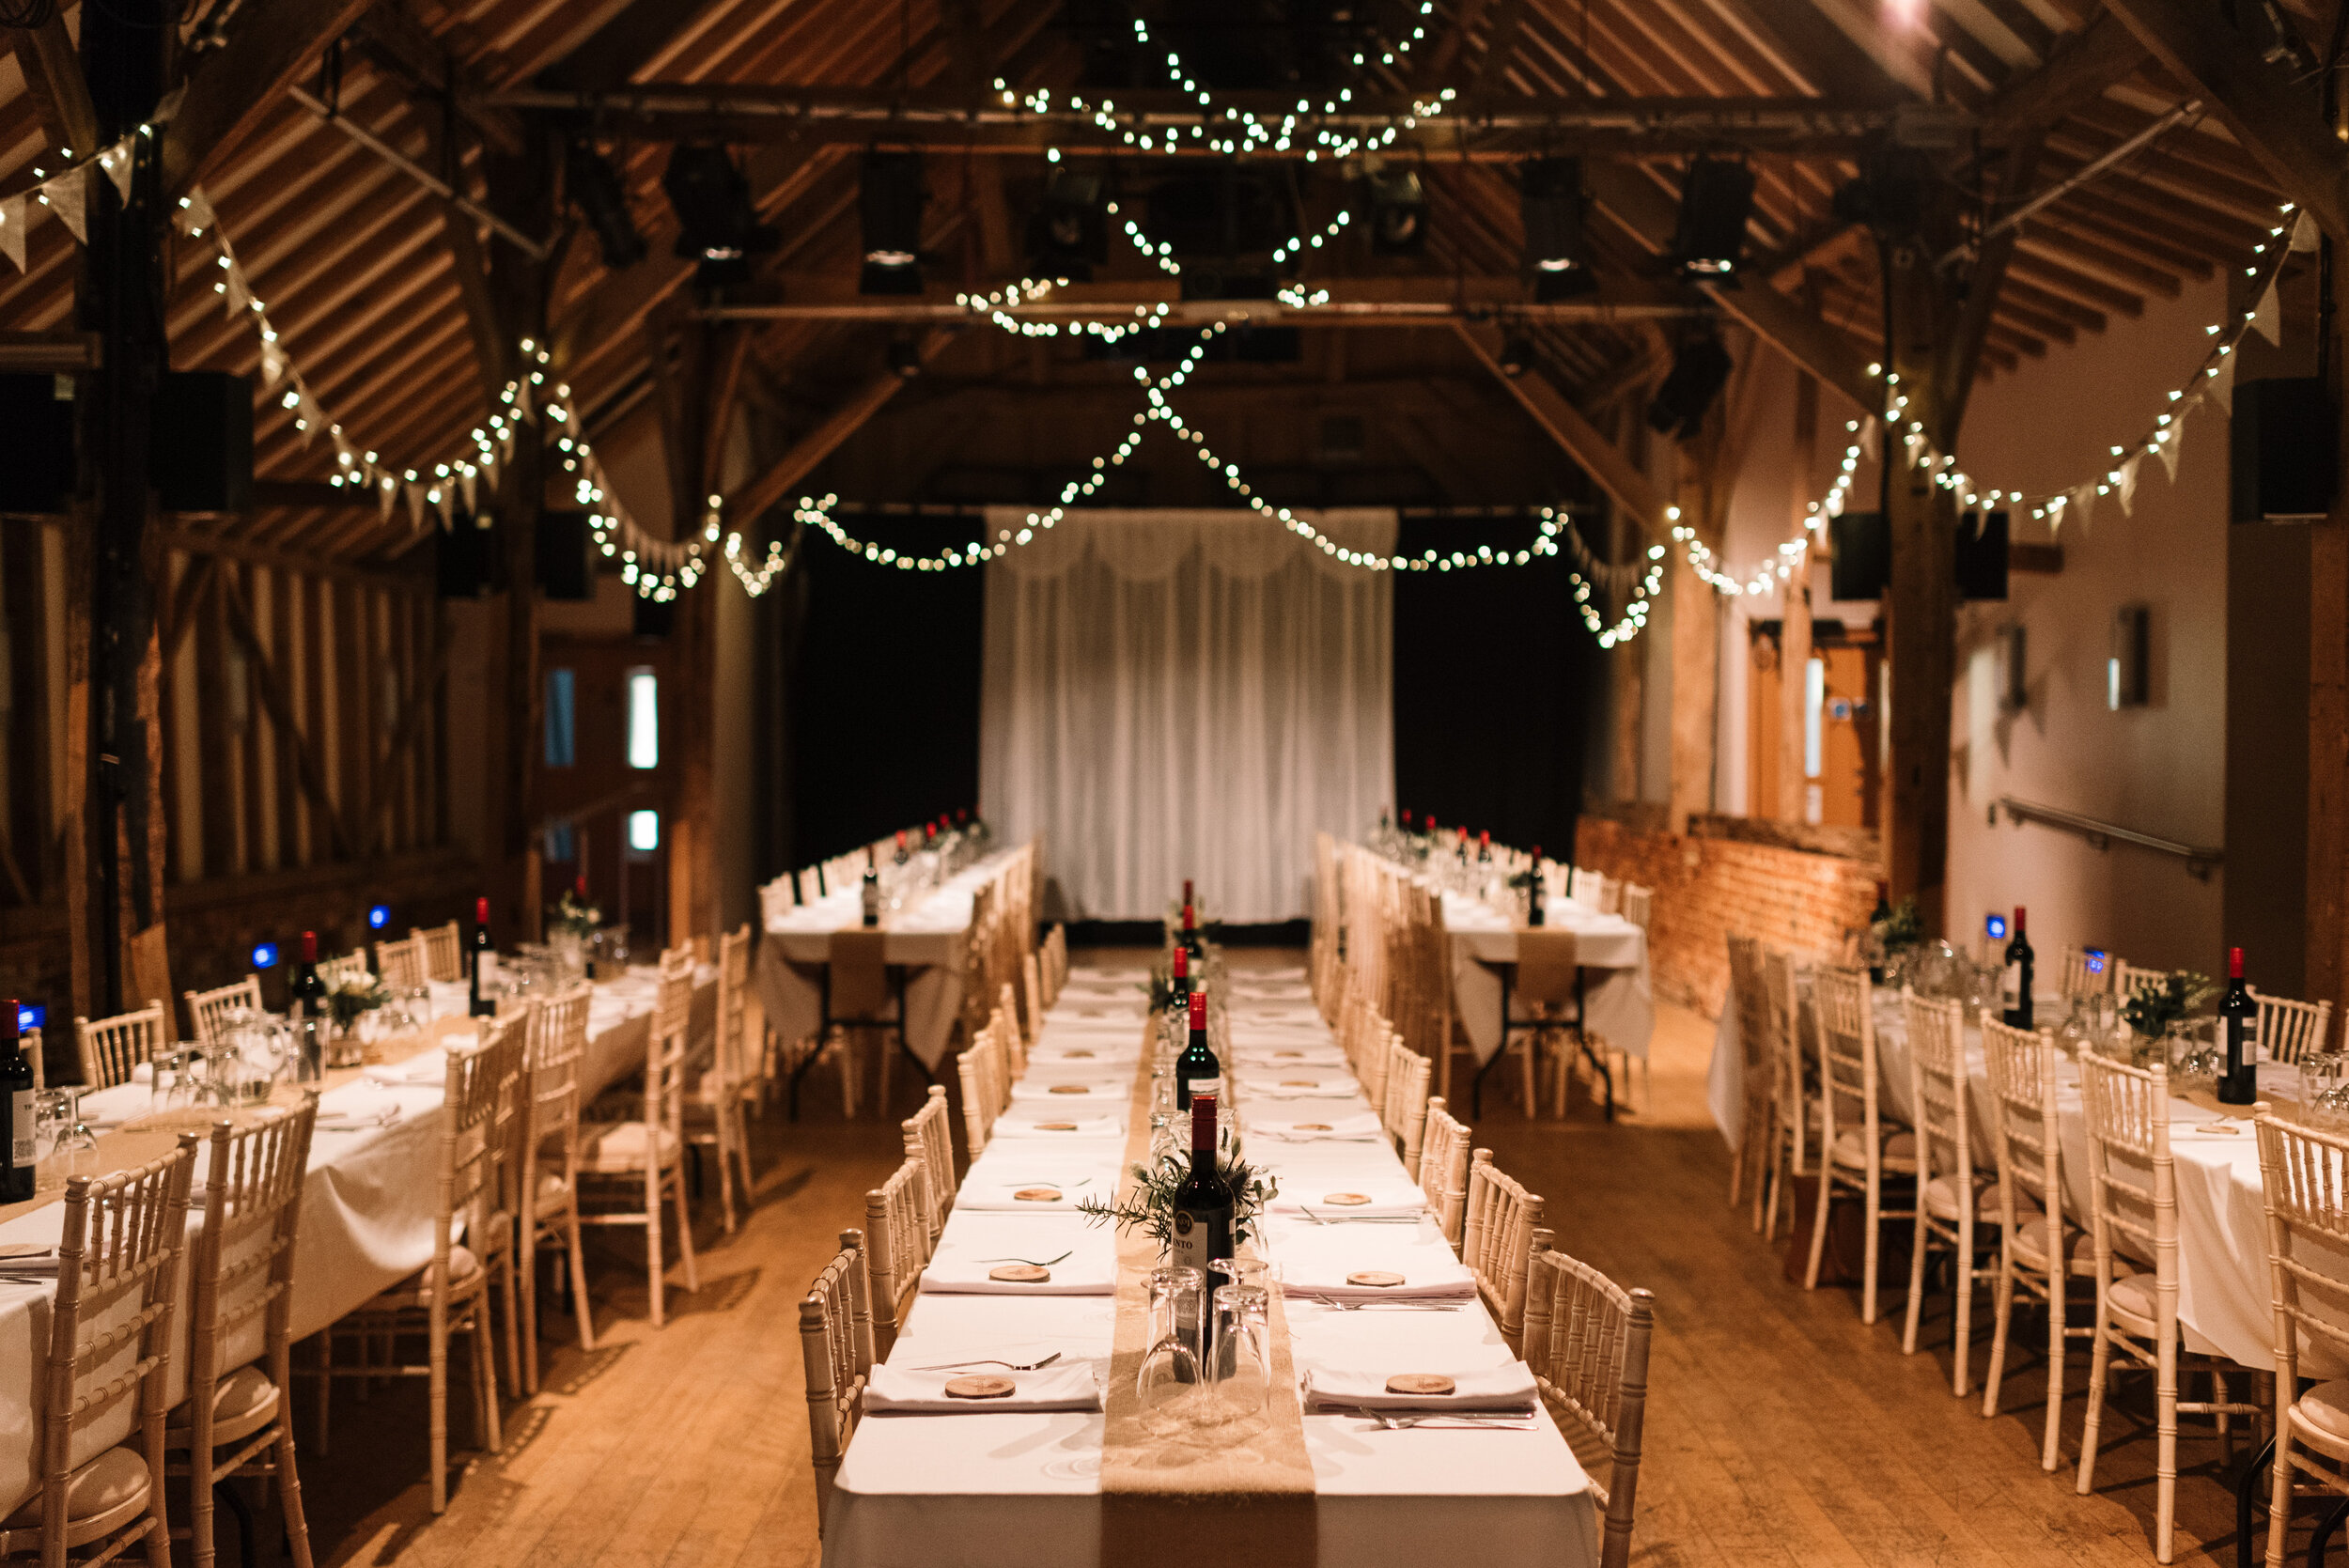 Wedding breakfast tables set out in banquet style at Hanger Farm near Southampton